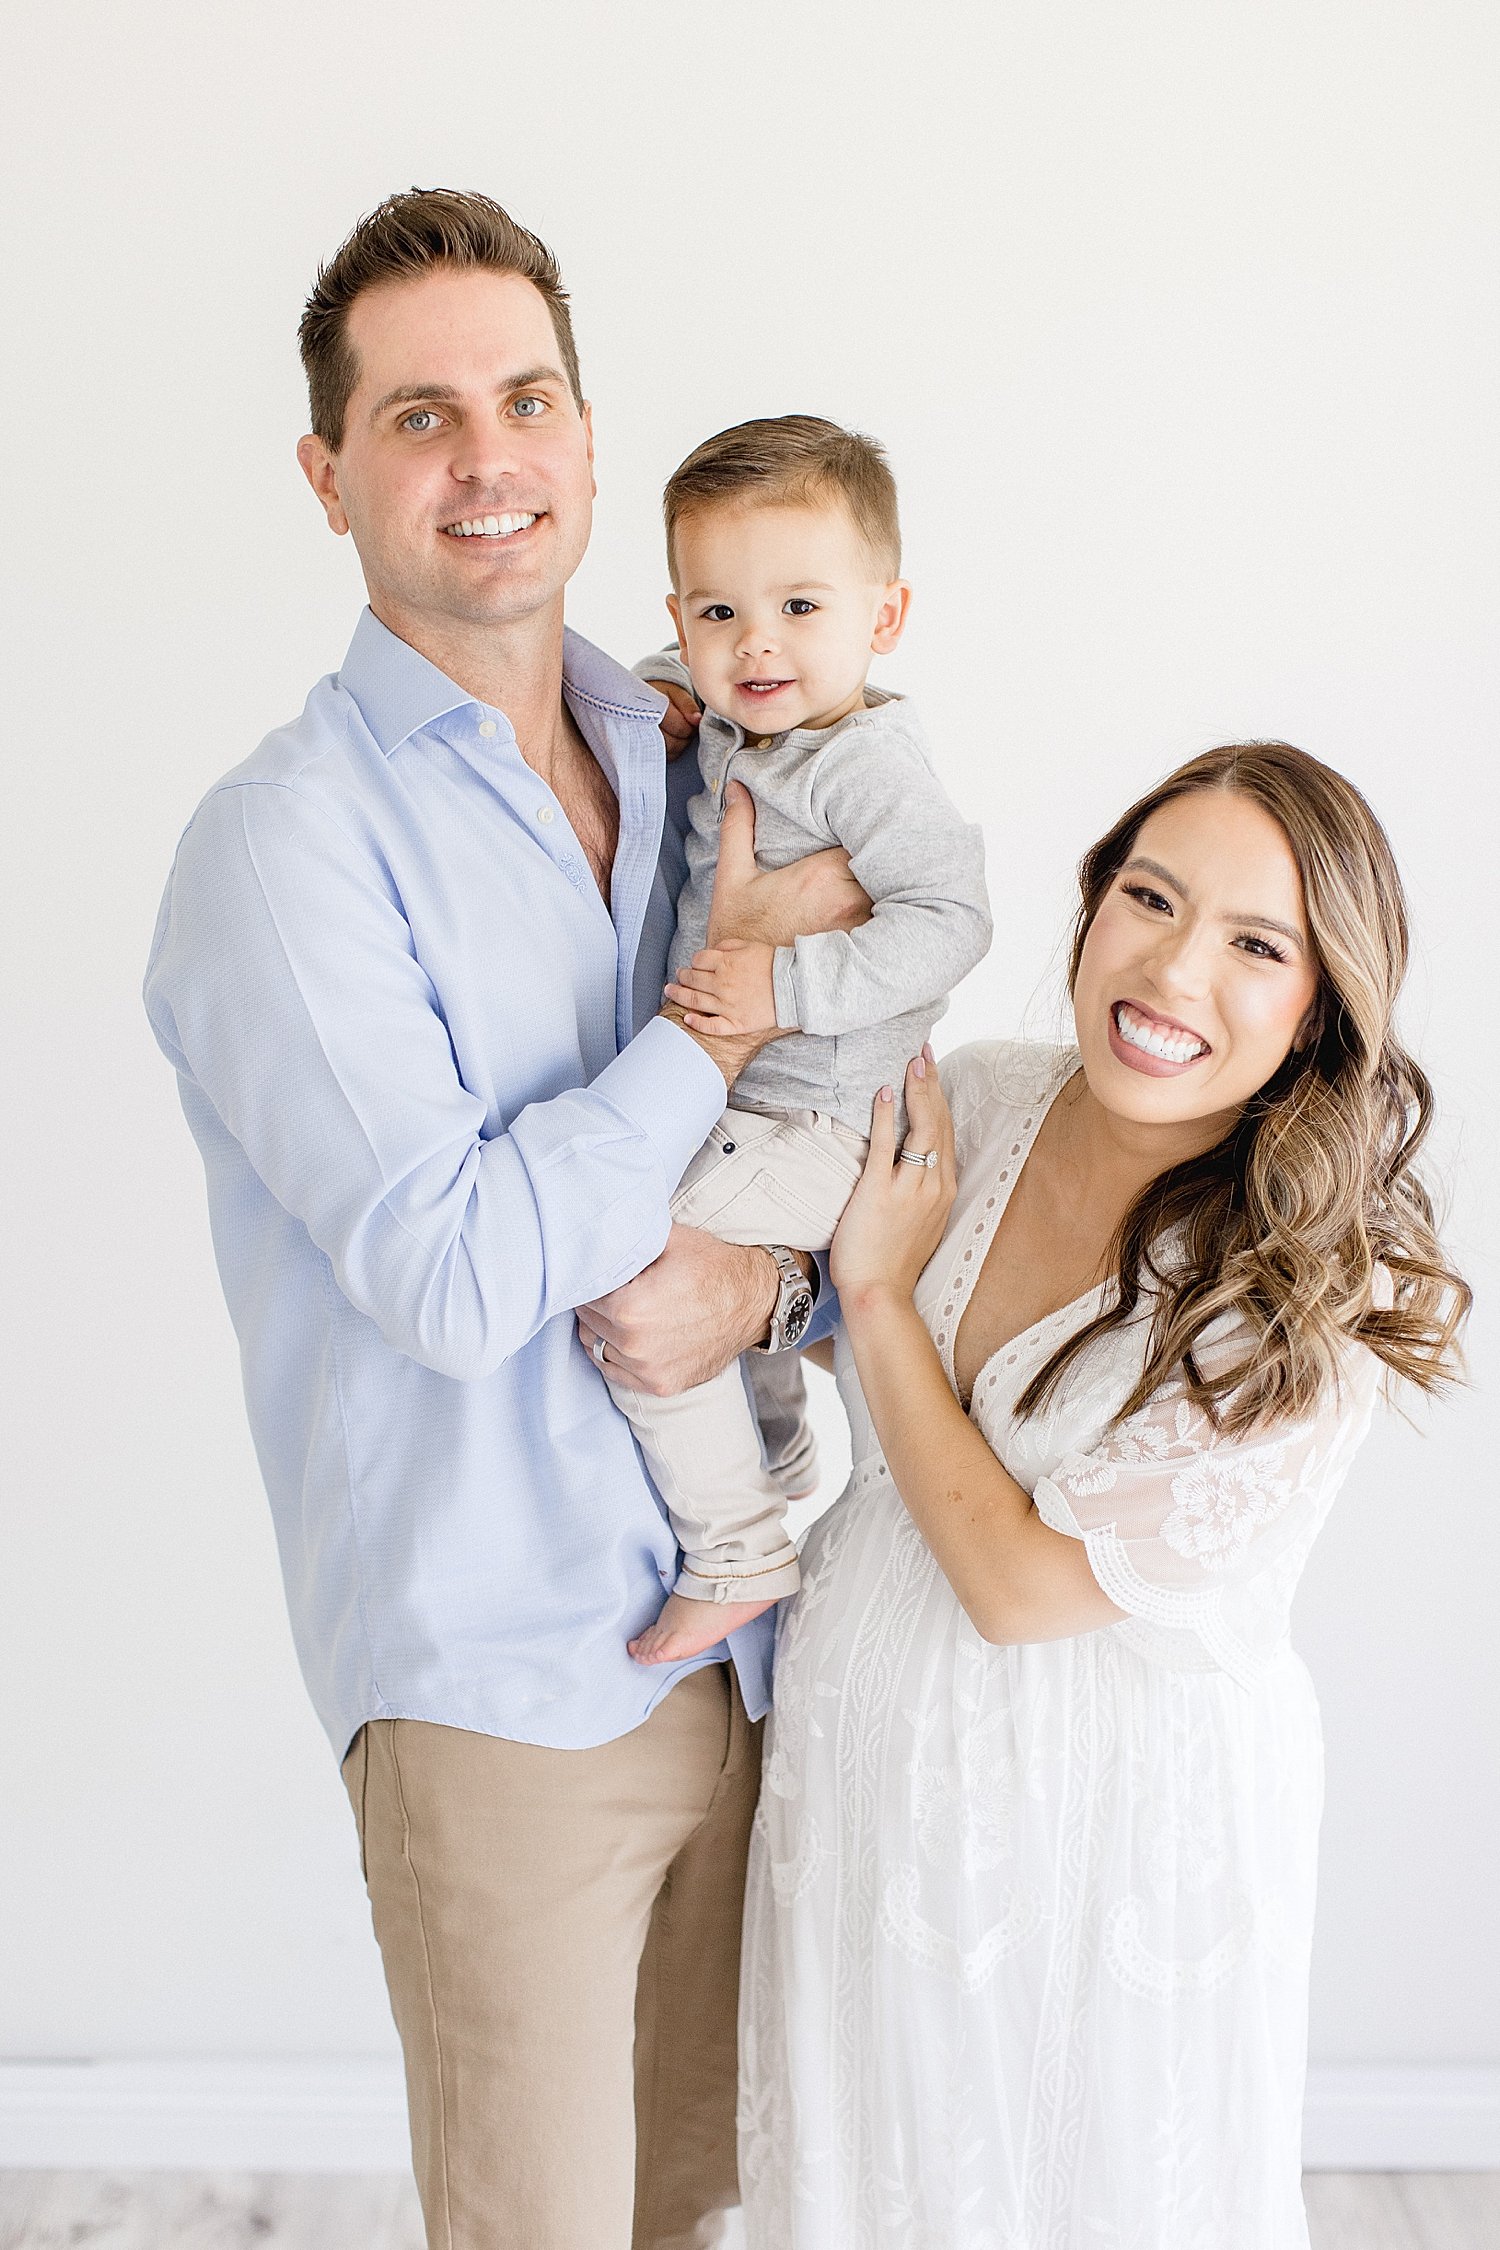 Mom, dad and toddler at maternity photoshoot with Ambre Williams Photography.